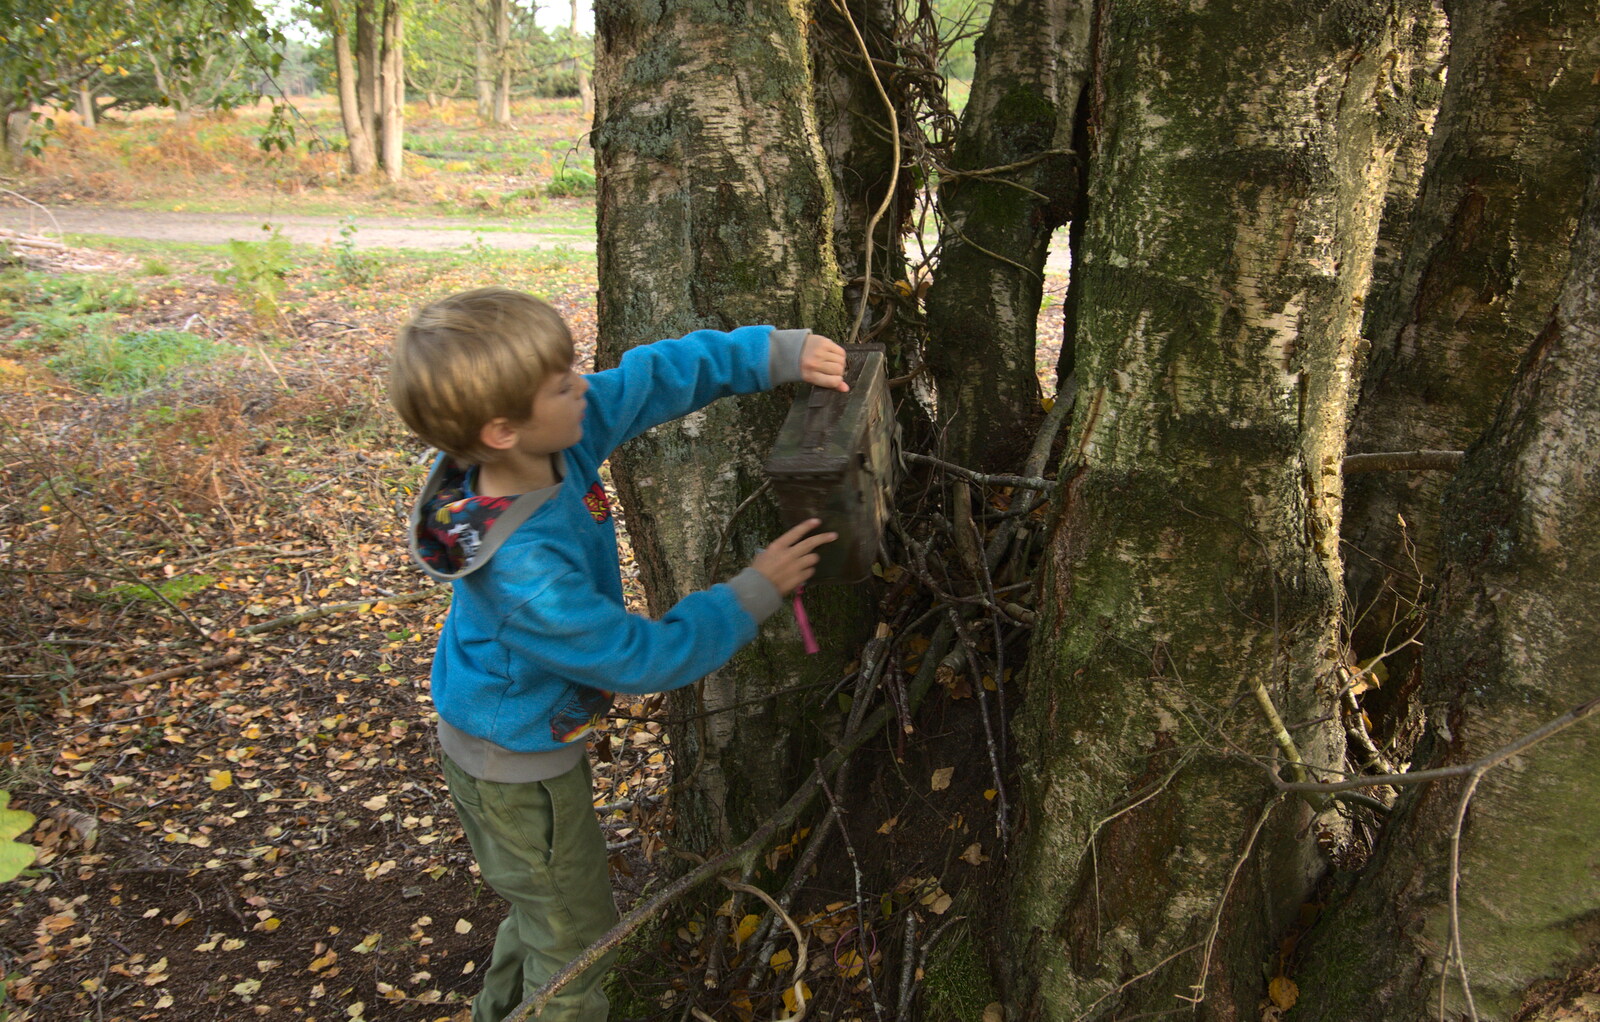 Harry puts the box back where we found it from Evidence of Autumn: Geocaching on Knettishall Heath, Suffolk - 7th October 2018